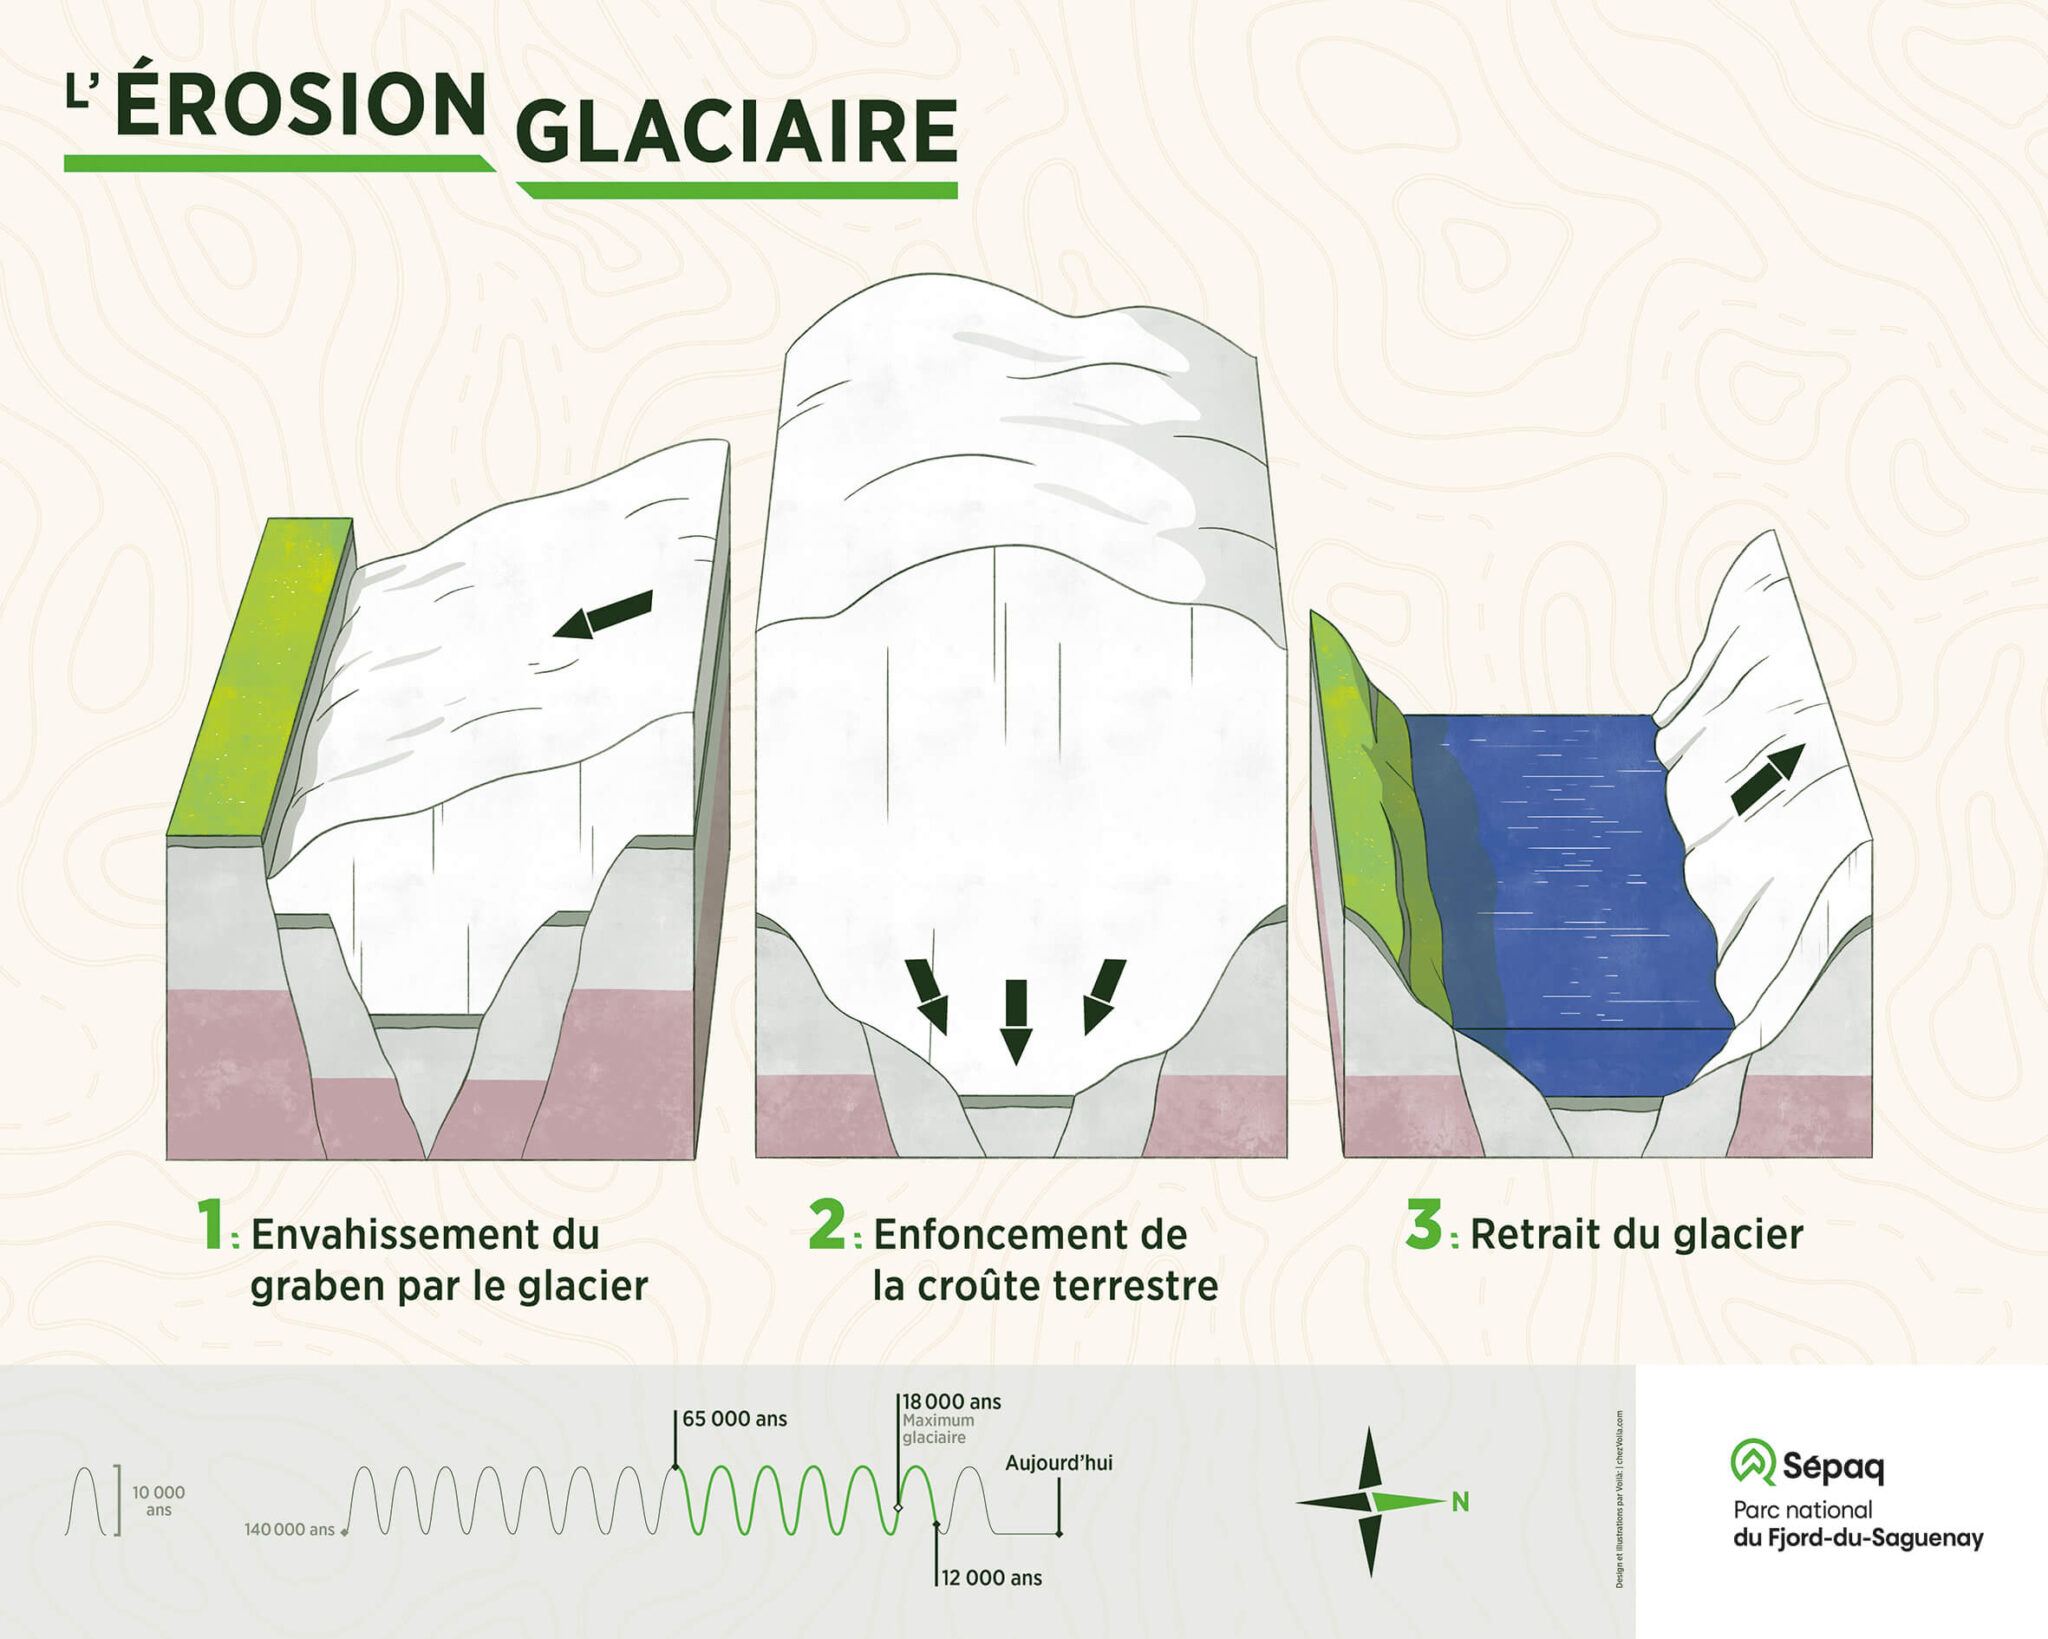 The title of the image is: "Glacial erosion". This panel illustrates this phenomenon in three chronological stages and it uses the same graphic elements as the previous panel. The image represents 3 blocks side by side in aerial view from the front. Each of the blocks is colored as follows: the surface, the outer layer, is green. Underneath, the thick layer of rocks is shown in grey. Finally, the last layer, the deepest, is in purple to remind the magma. The first block on the left illustrates the invasion of the graben by the glacier at the beginning of the Ice Age. We see the graben, cut in a V shape in the previous panel, gradually covered by a thick white glacier. The second block, in the center, shows the sinking of the earth's crust due to the weight of the huge glacier that has now covered its entire surface. The third and last block, on the right of the panel, shows the retreat of the glacier at the end of the ice age. The crust that had sunk under its weight has not yet risen and is now below sea level. The water, colored in blue, has invaded the valley where the glacier is no longer. We can also see in this third stage that the glacier has caused the erosion of the sides of the valley. The panel also contains a strip of technical information, located at the bottom of the illustration. We can read that the ice age started 65,000 years ago, reached its maximum 18,000 years ago and ended about 12,000 years ago. In the center of the technical panel, a compass rose indicates that the North is located to the right of the panel.